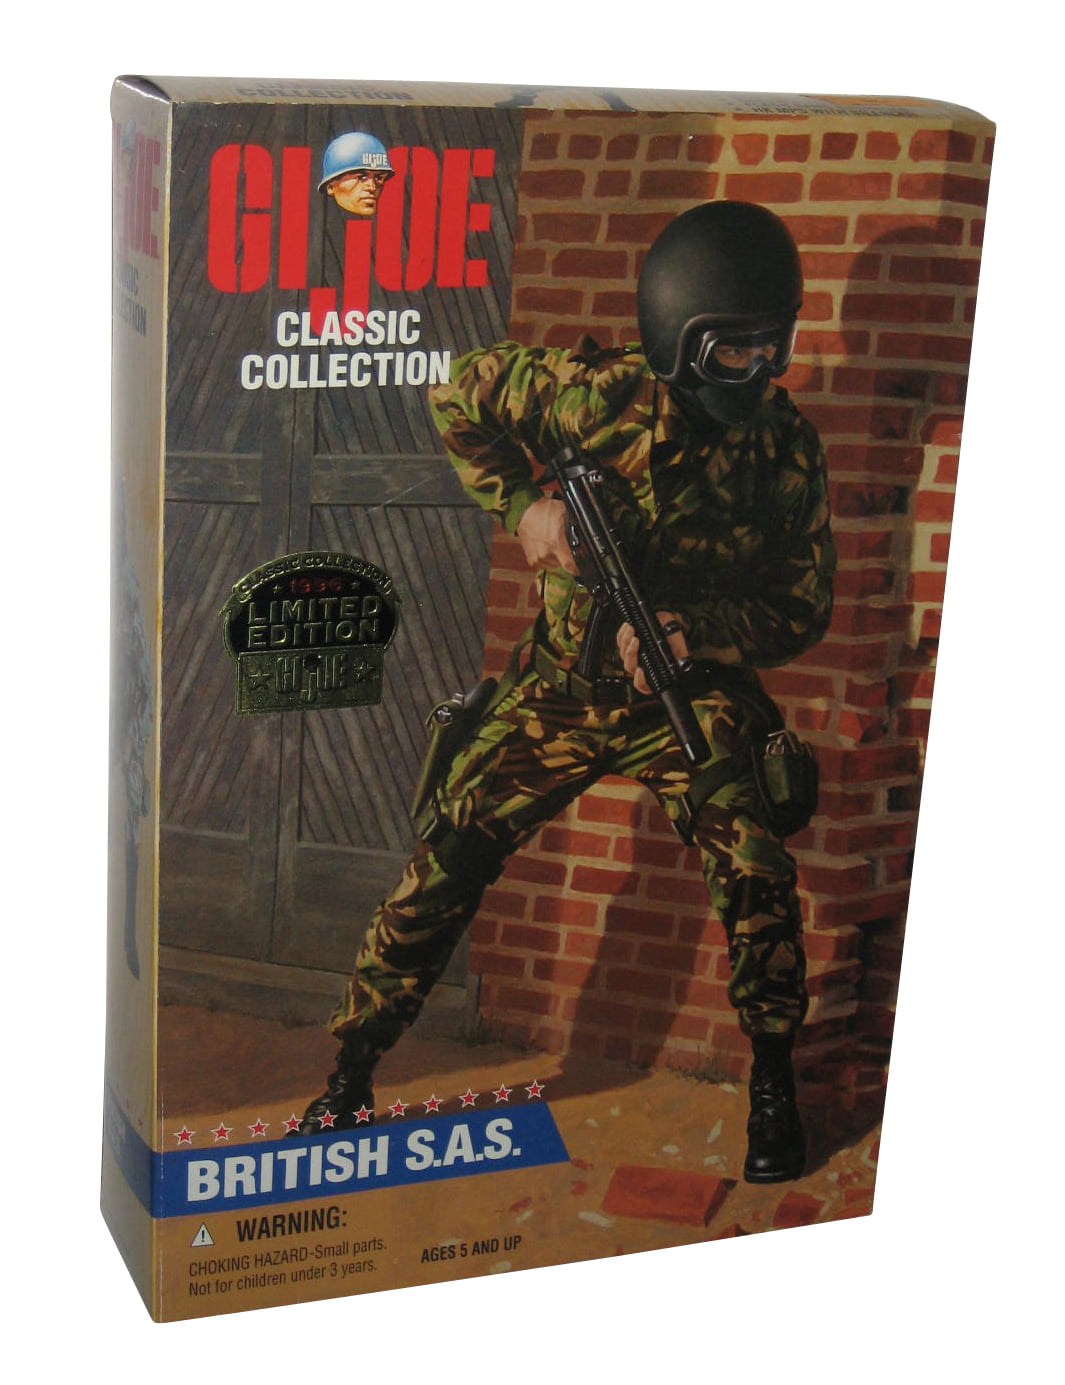 GI Joe Classic Collection British S.A.S 12-Inch (1996) Kenner